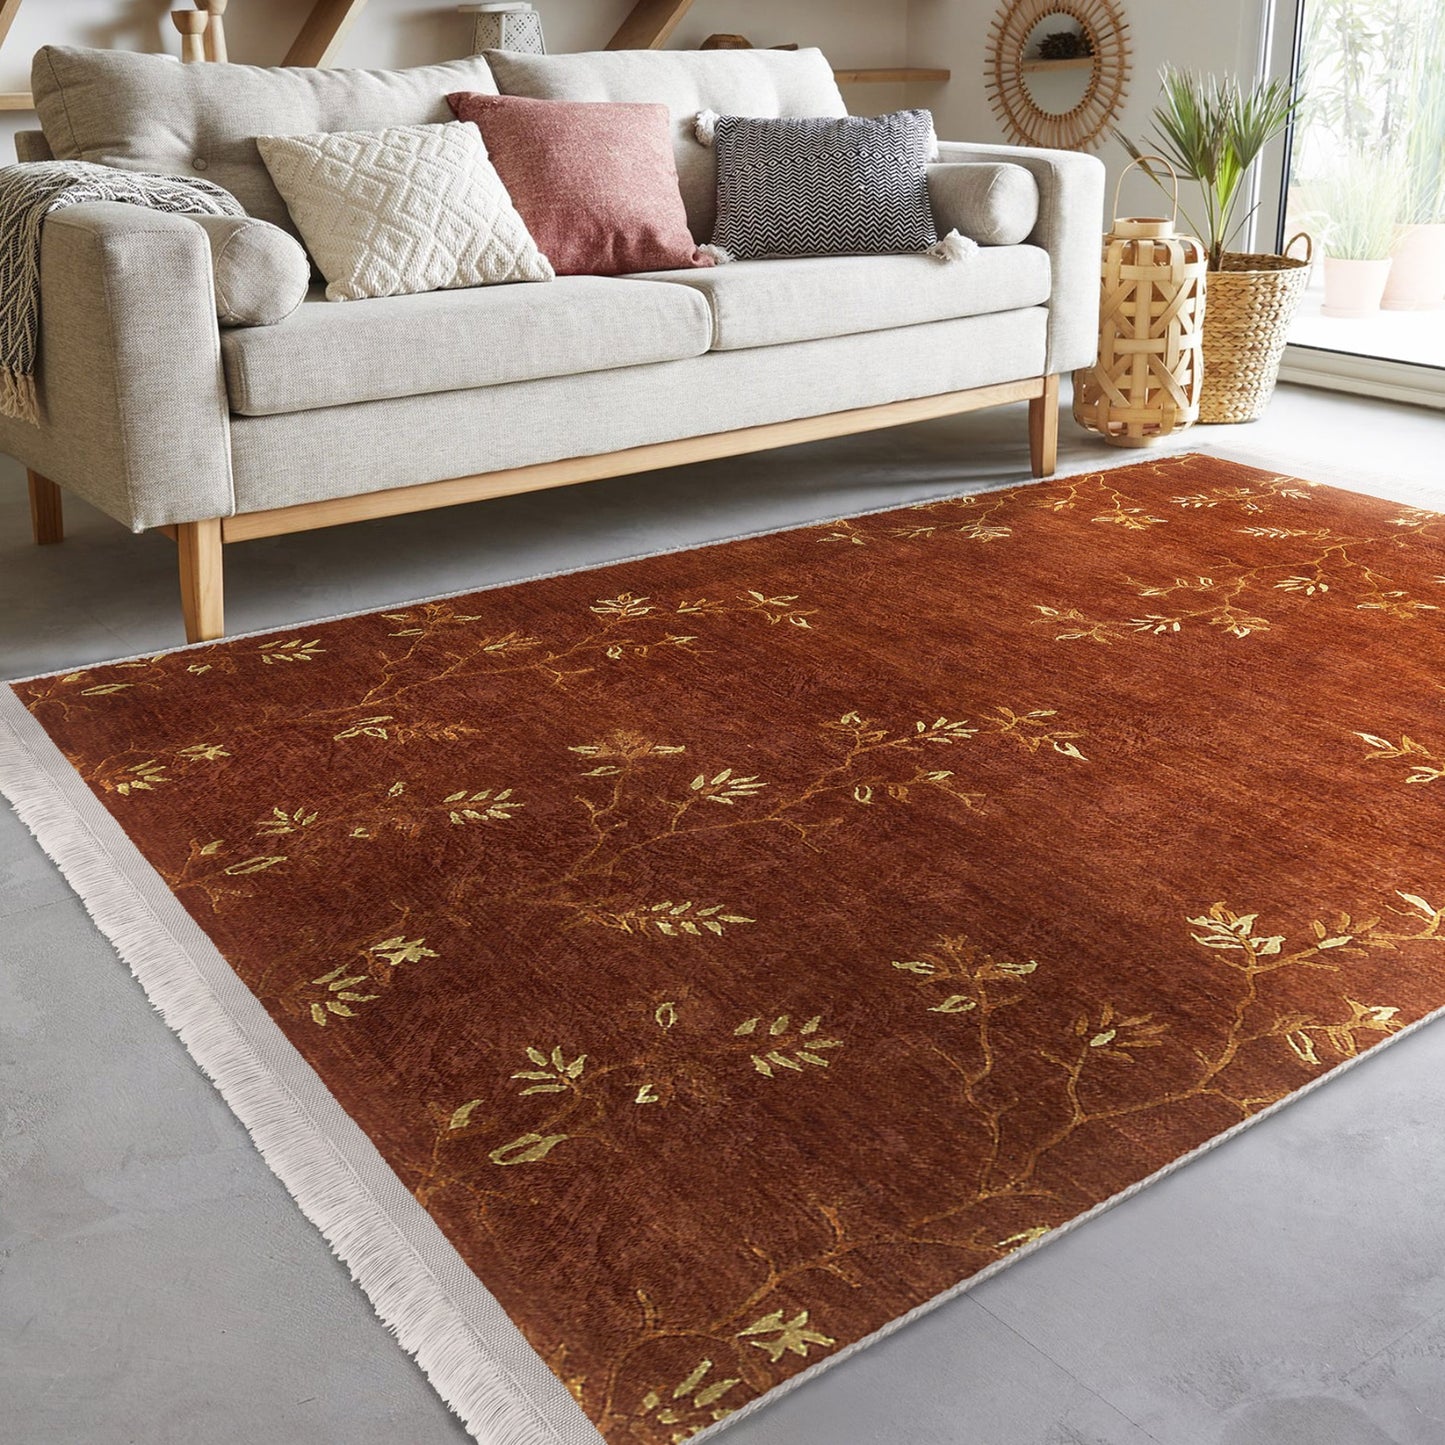 Rug with Natural Elegance and Dry Flower Pattern